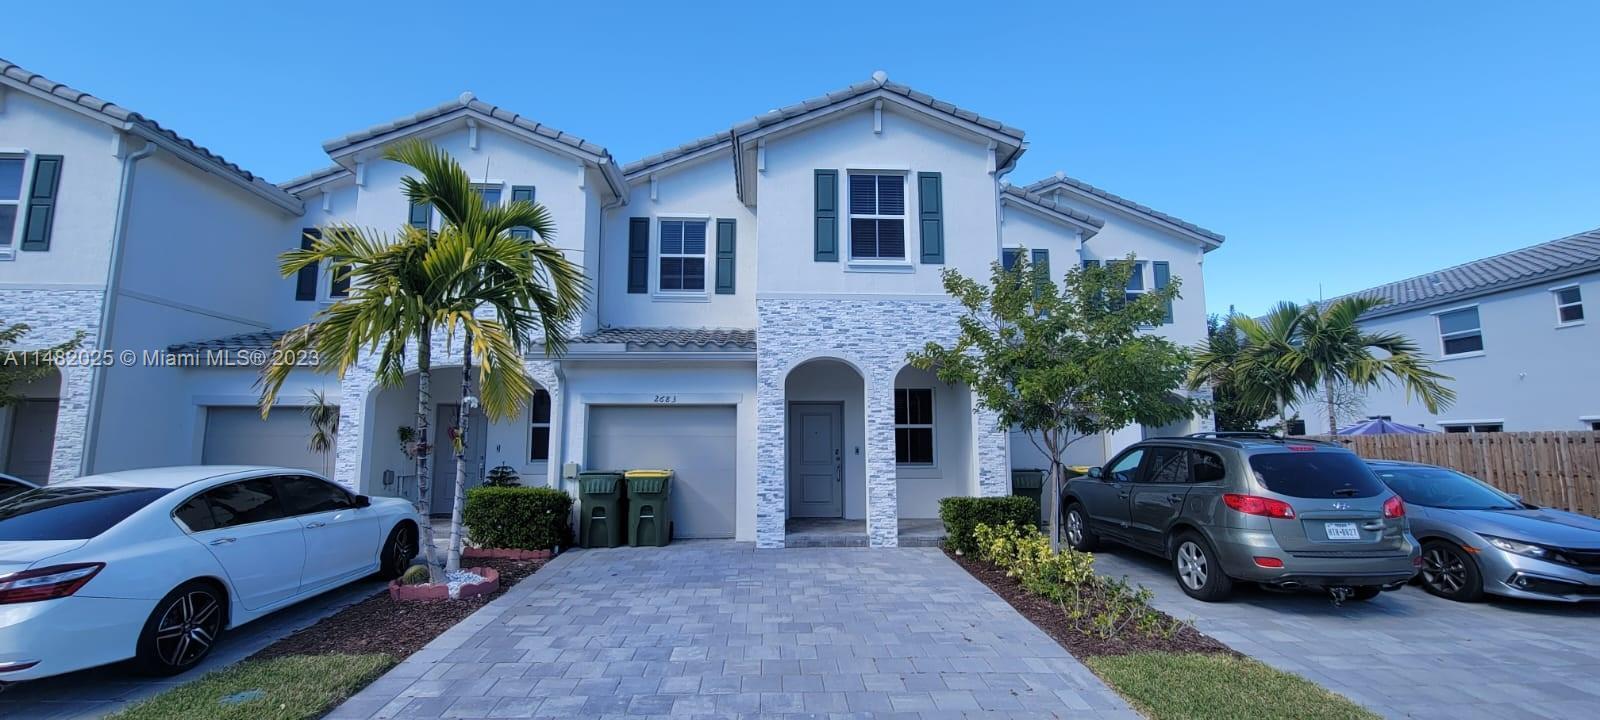 Photo of 2683 SE 12th St in Homestead, FL